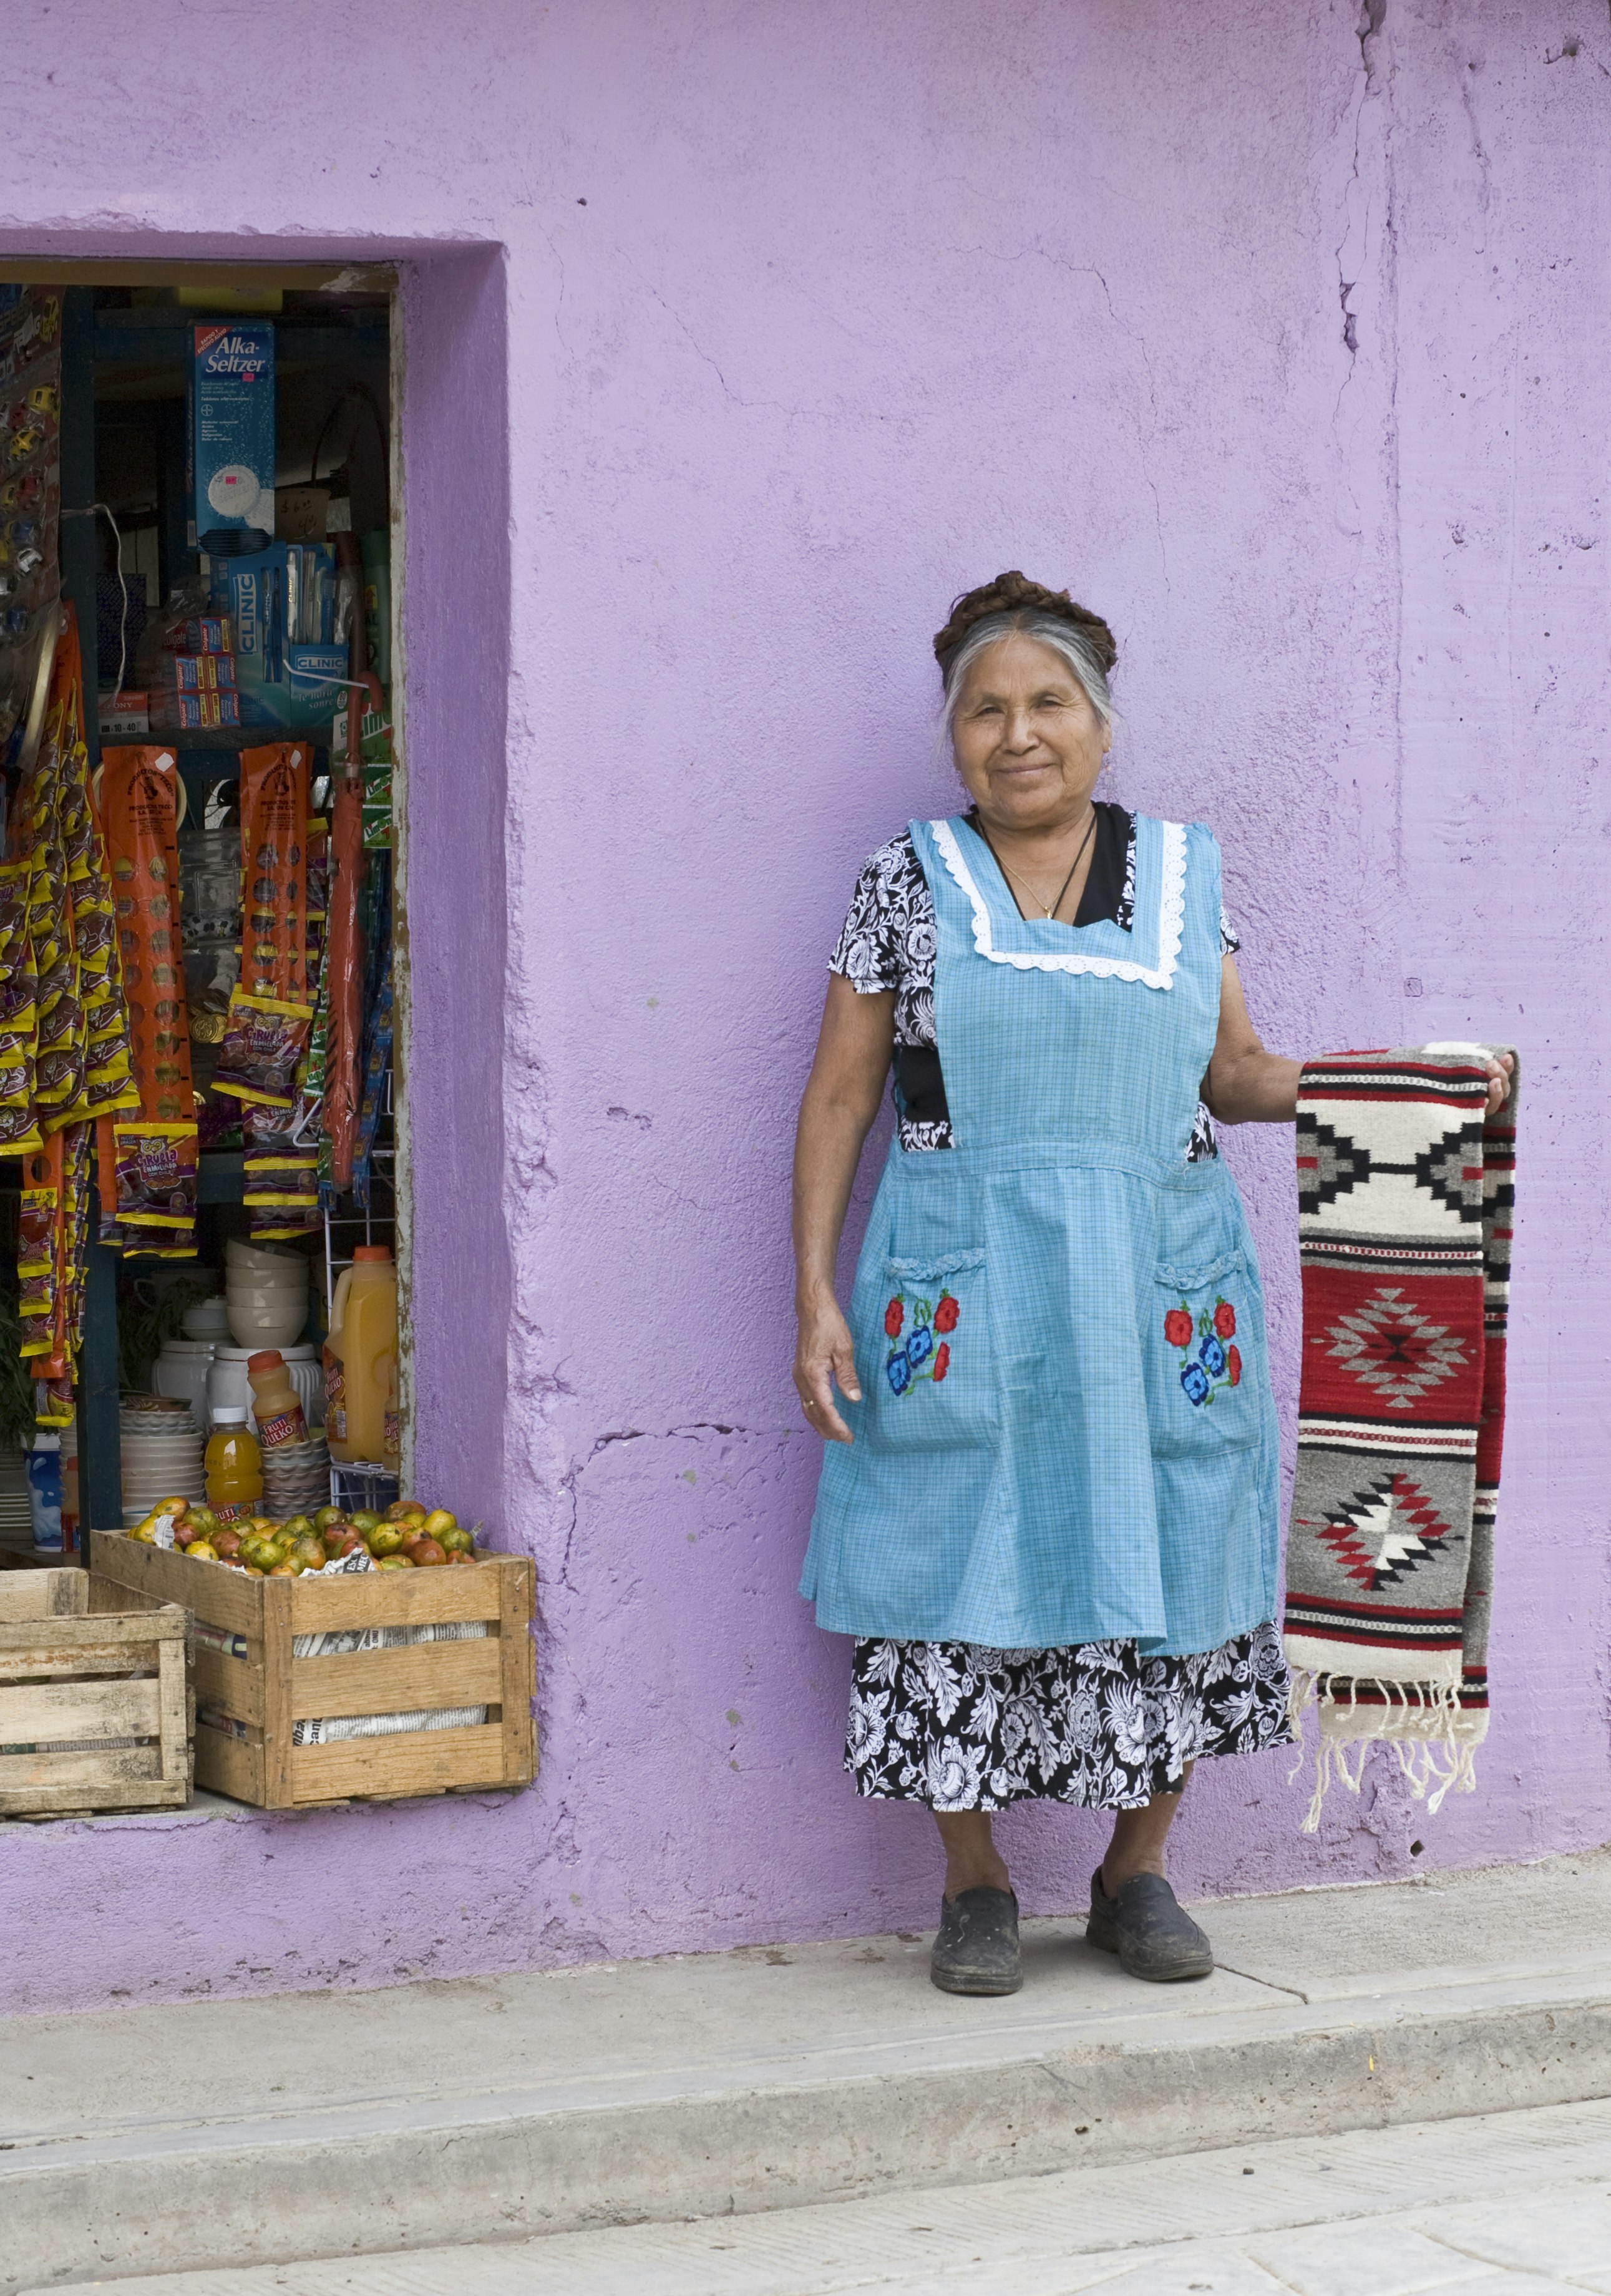 Friendly, smiling local indigenous Mexican woman vendor displaying handwoven Zapotec rug outside shop